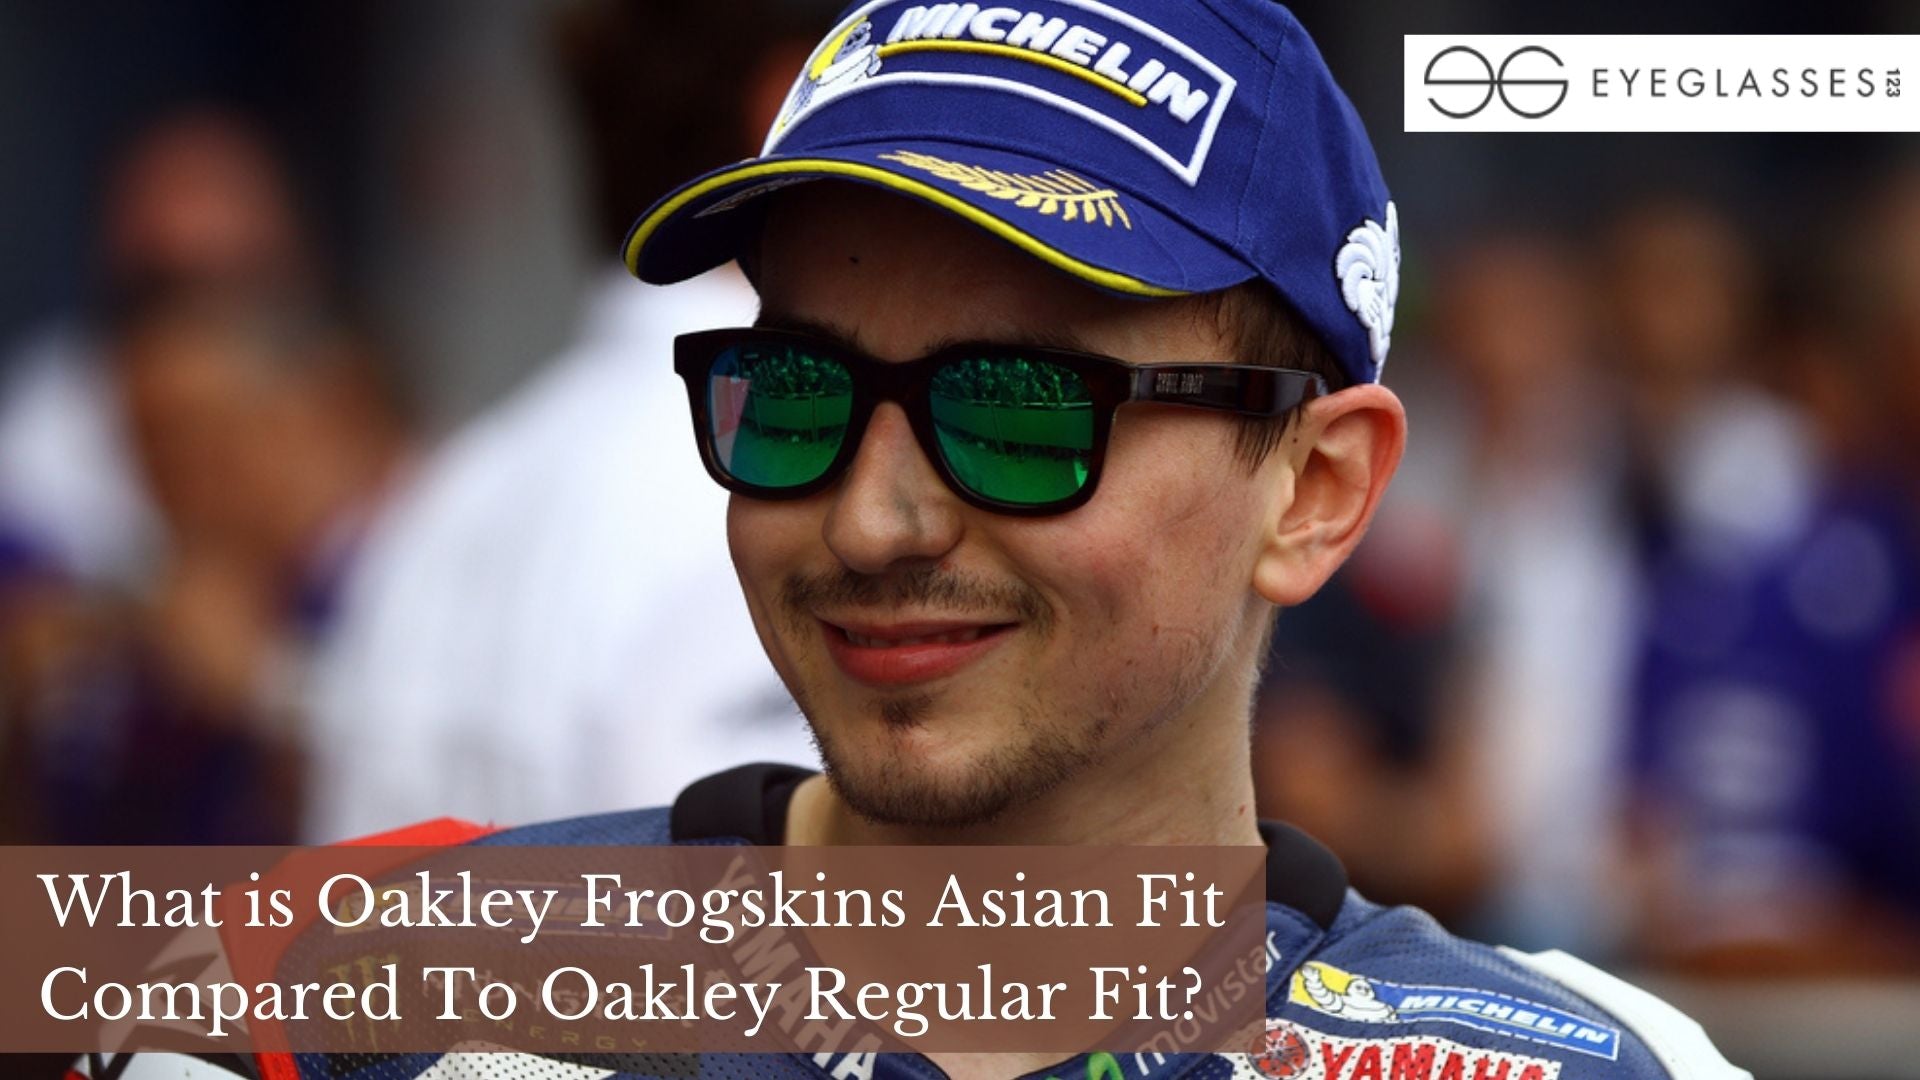 http://www.eyeglasses123.com/cdn/shop/articles/What_is_Oakley_Frogskins_Asian_Fit_Compared_To_Oakley_Regular_Fit.jpg?v=1639106850